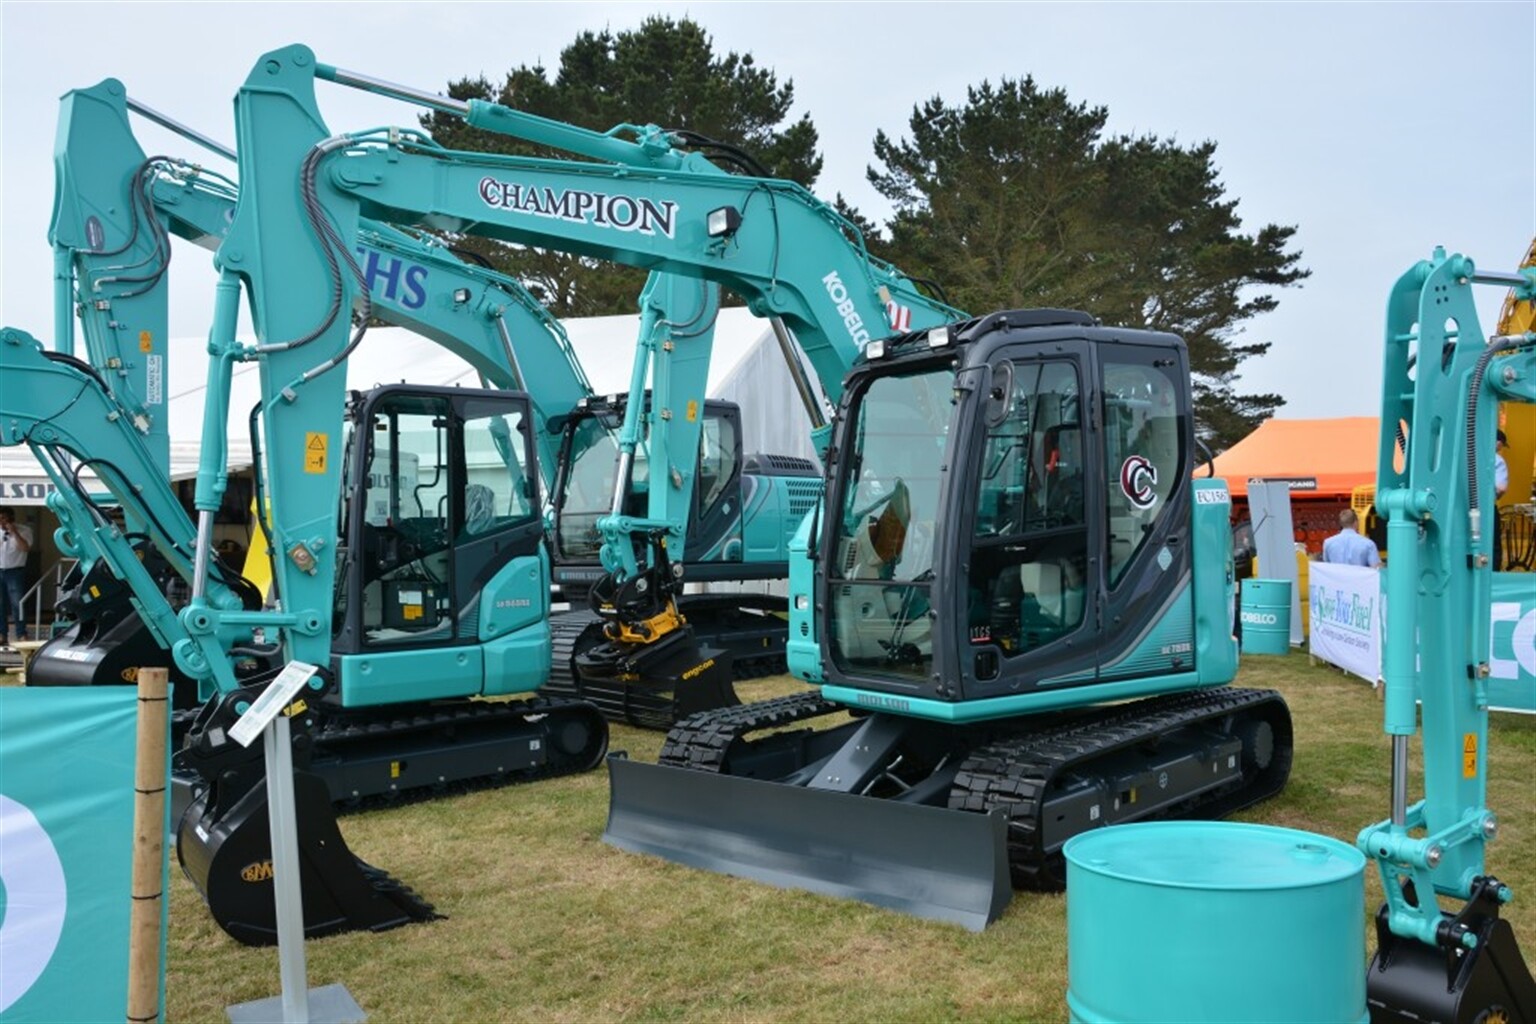 Excavator feast at the Royal Cornwall Show 2016 (Part One)